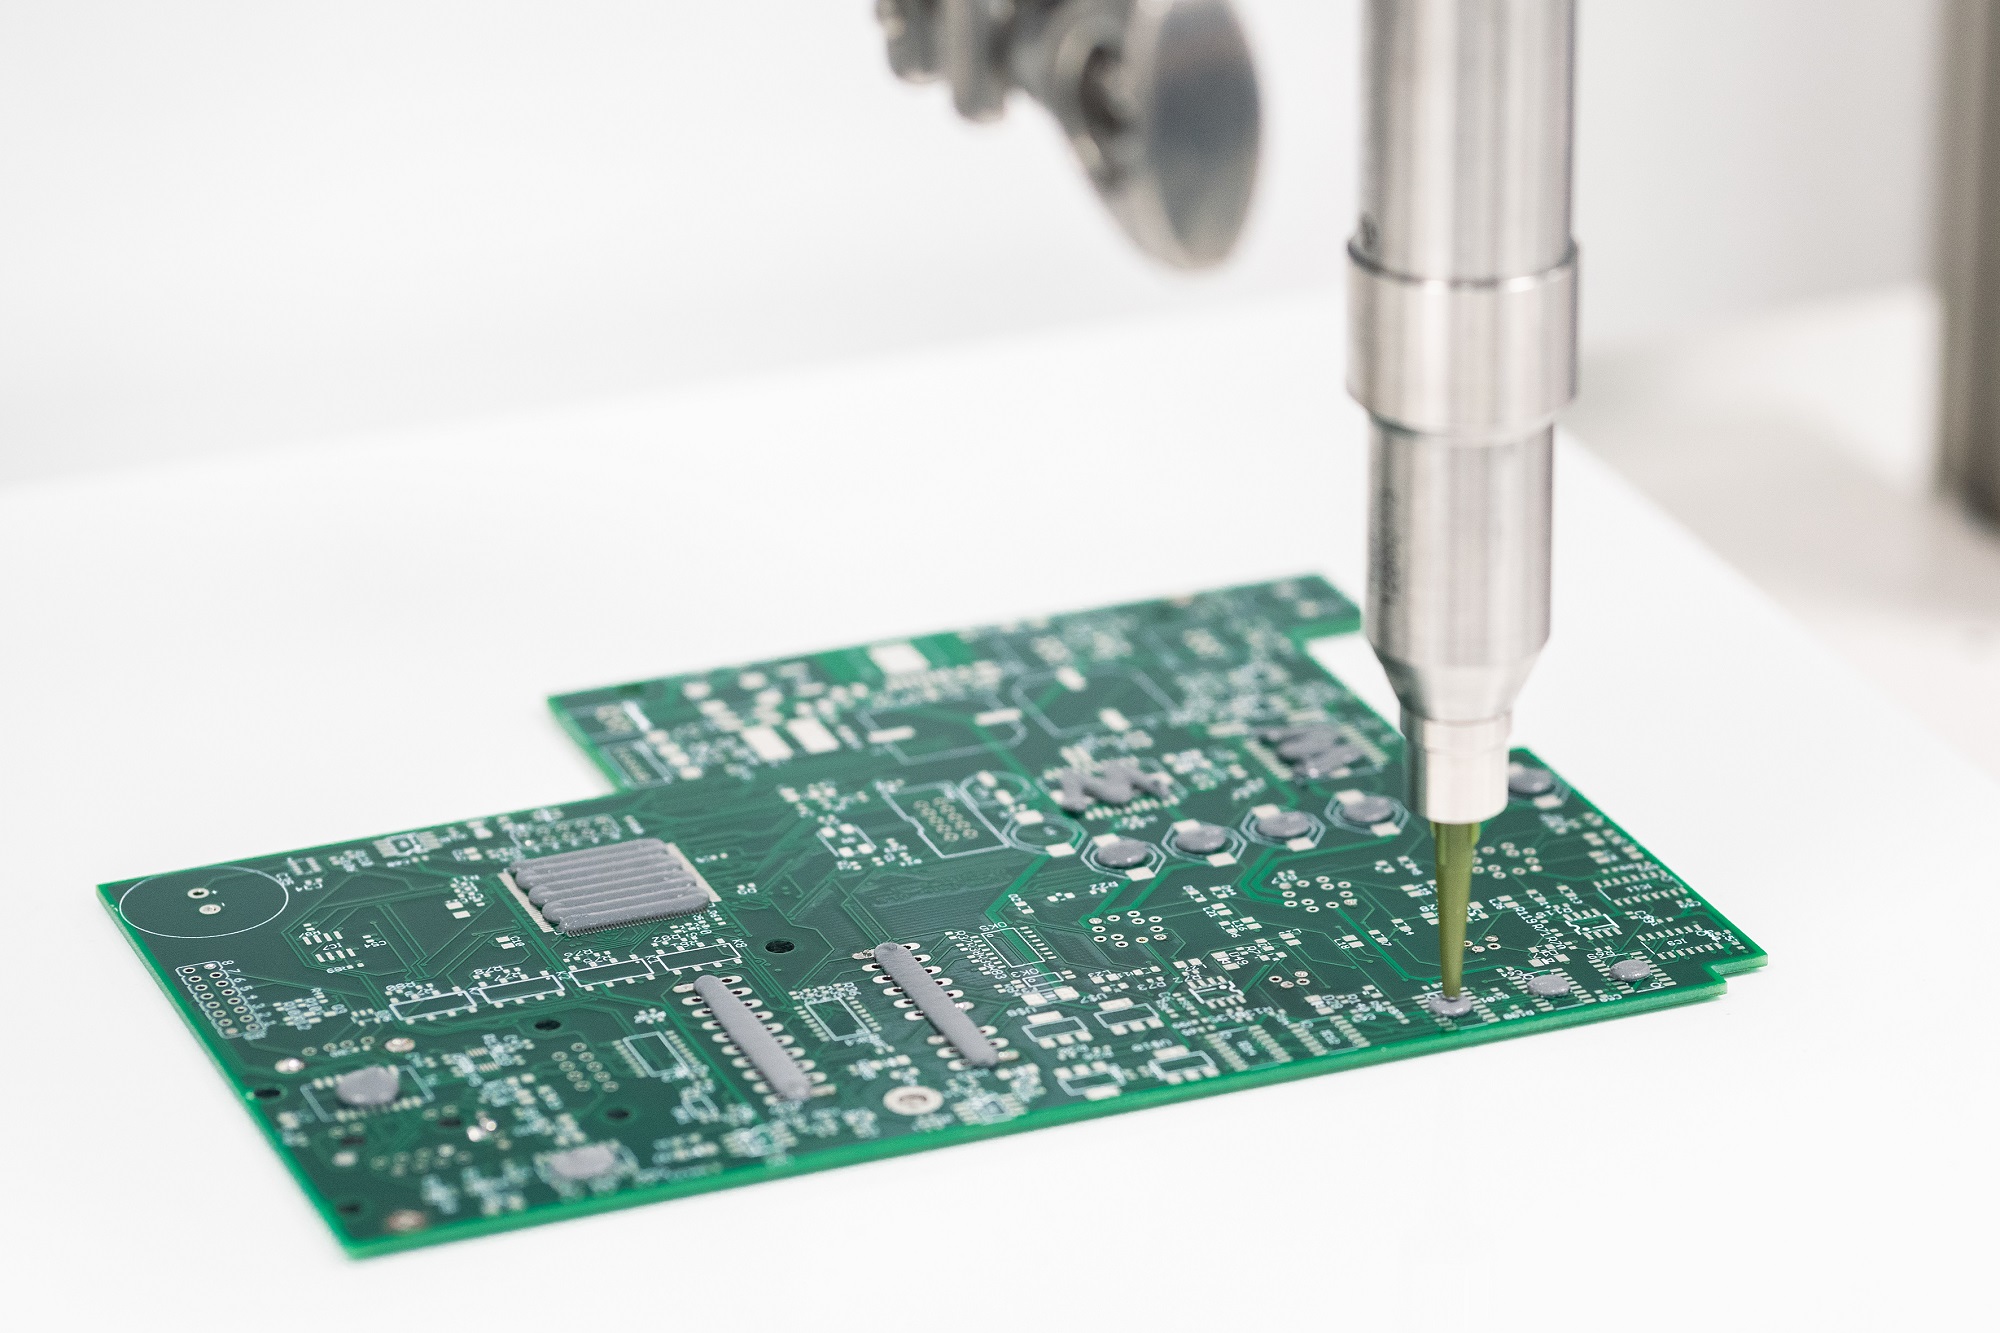 Tests showed the pumps are capable of precise dispensing onto a printed circuit board, despite the high viscosity and abrasion of the thermal paste.